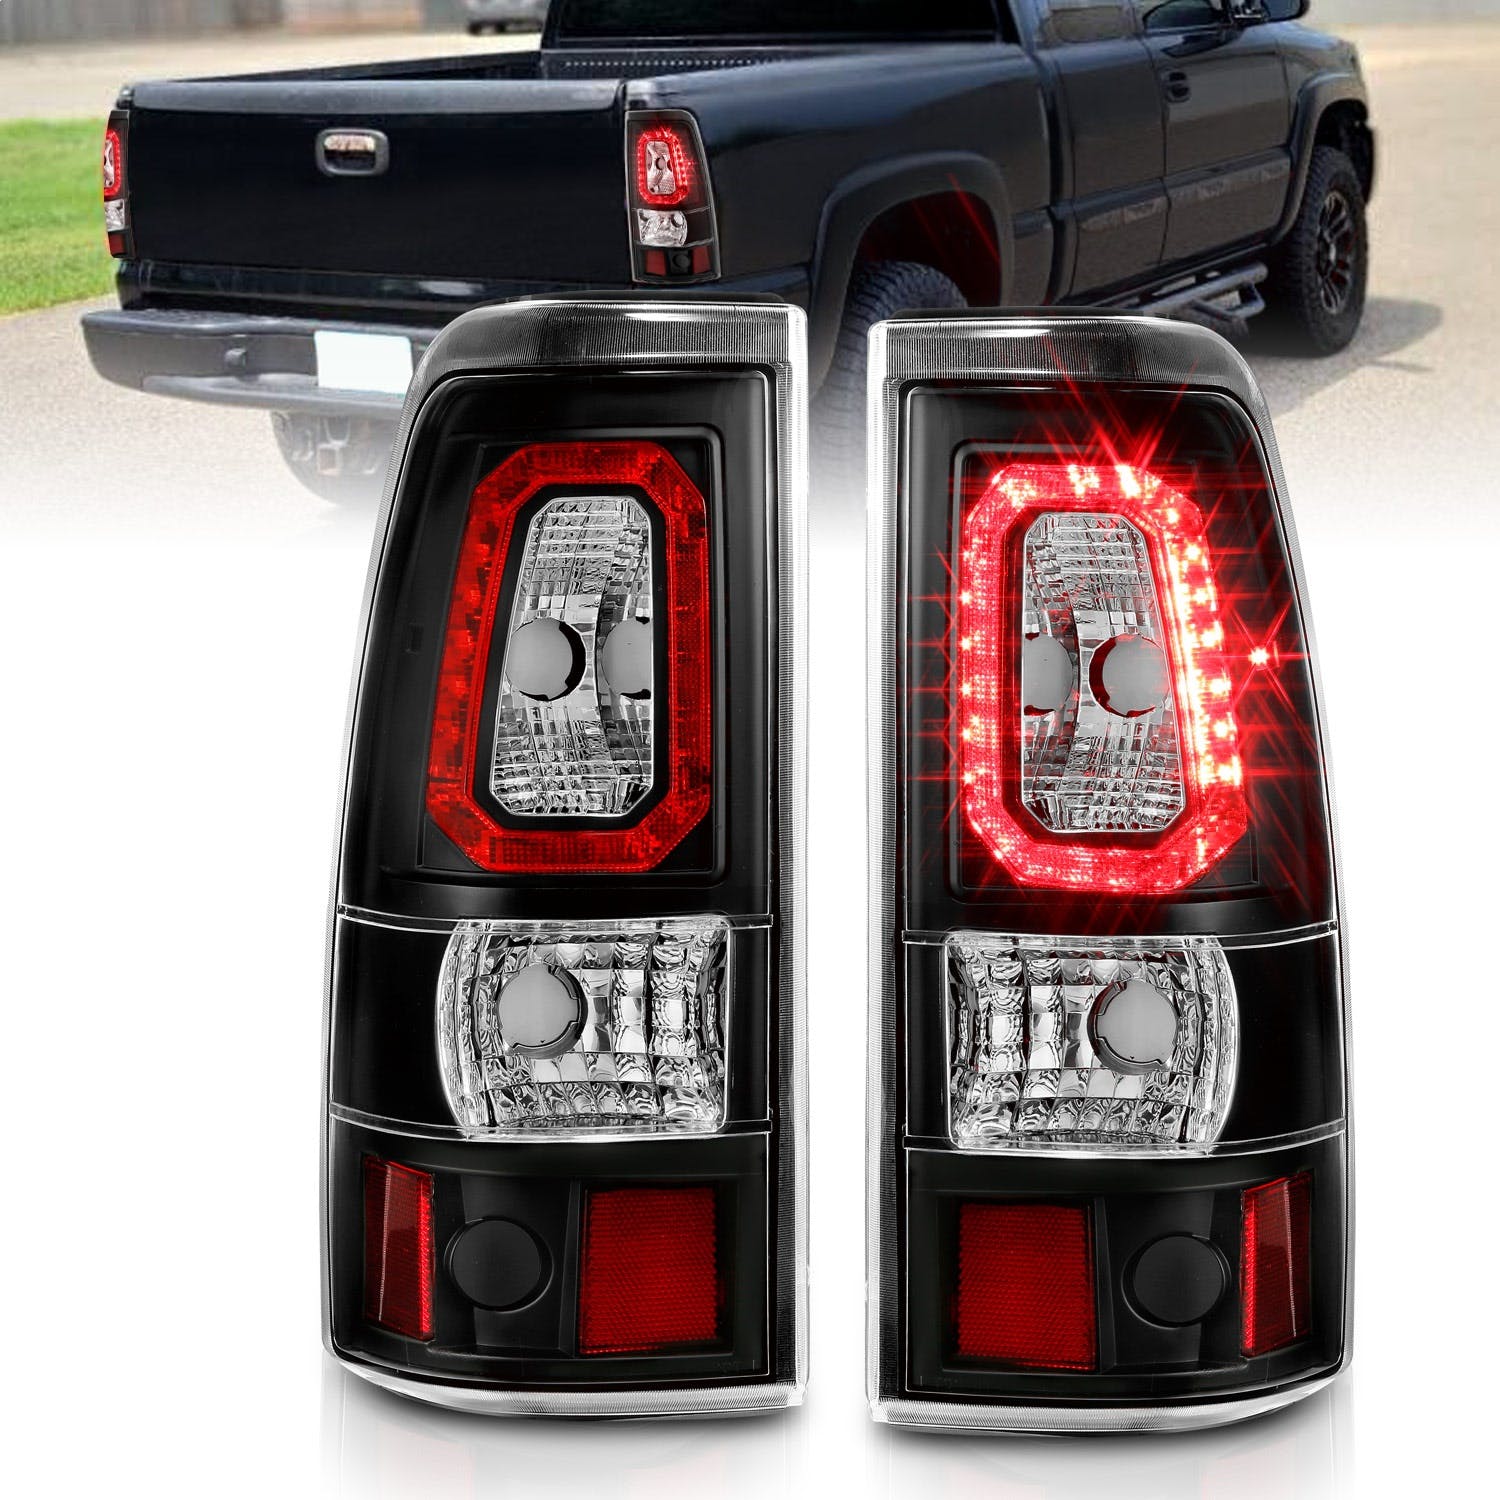 AnzoUSA 311324 LED Taillights Plank Style Black with Clear Lens